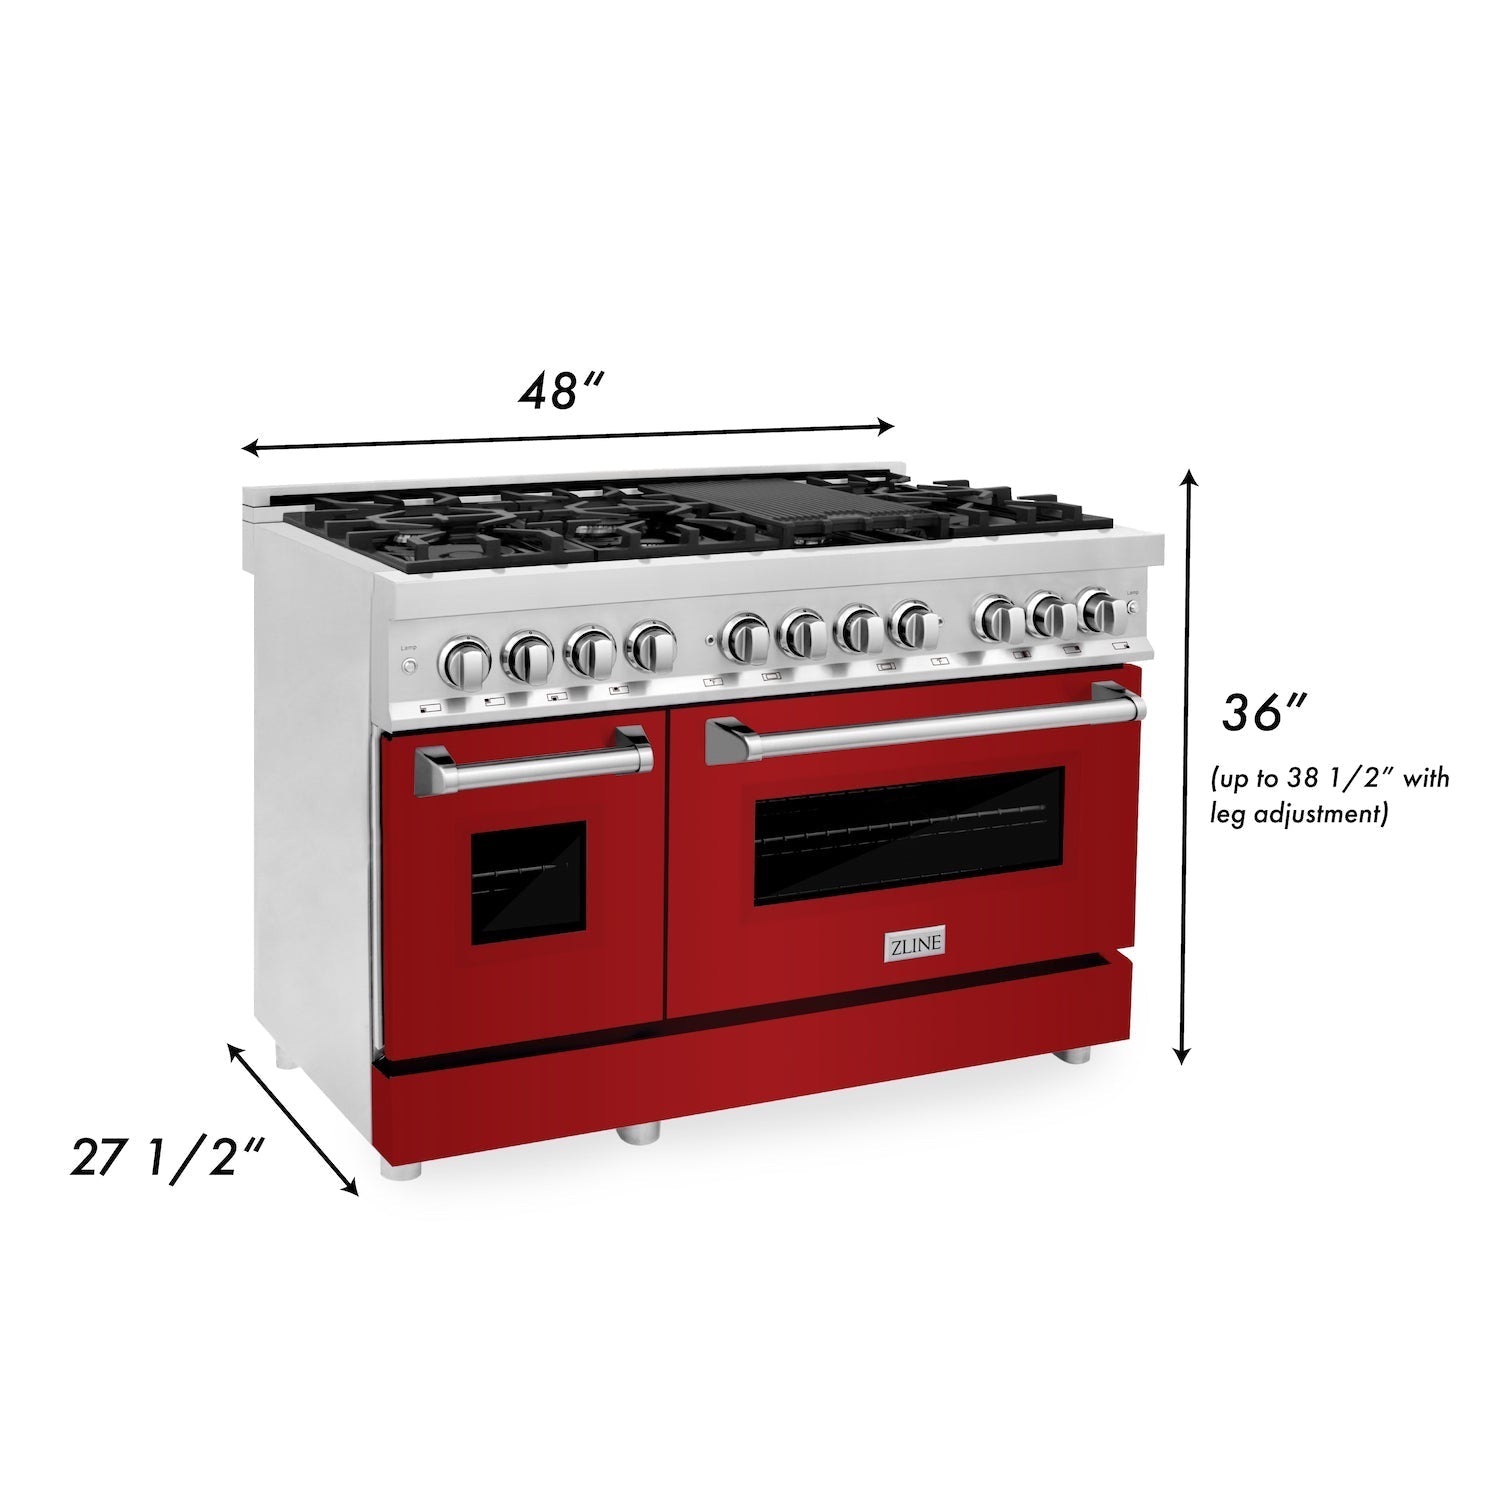 ZLINE 48" 6.0 cu. ft. Dual Fuel Range with Gas Stove and Electric Oven in Stainless Steel and Red Gloss Door (RA-RG-48)